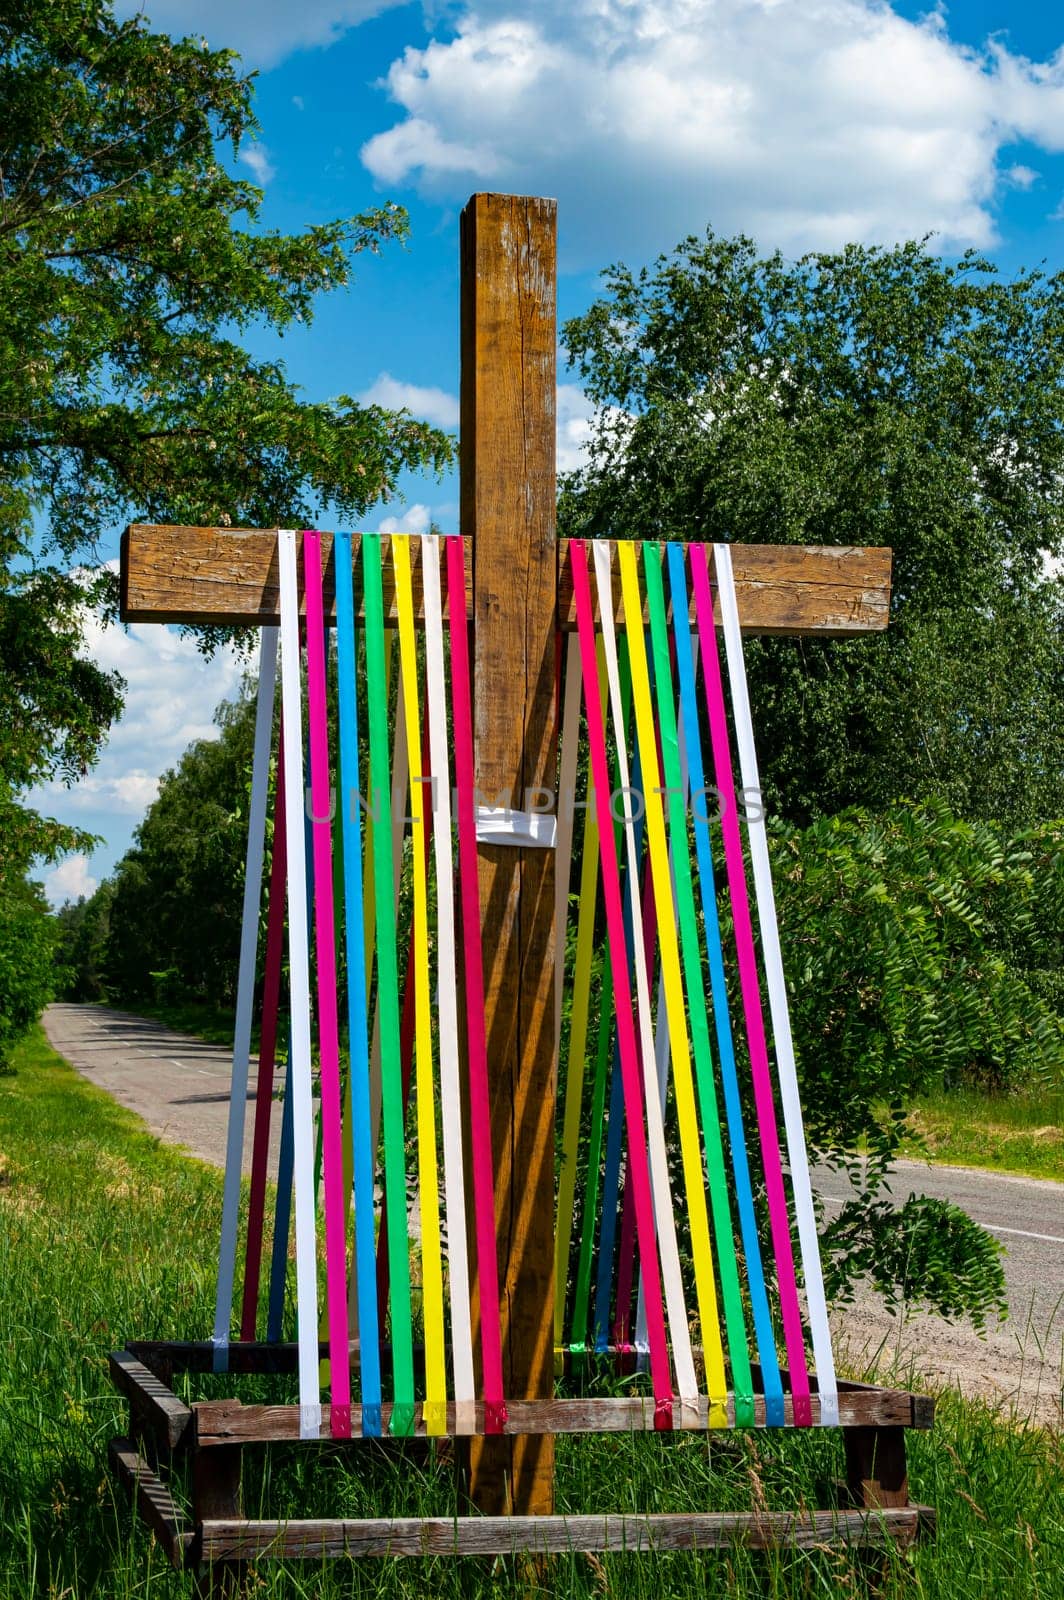 The Christian cross is decorated with ribbons of rainbow colors. Christian cross. Easter decoration. Religion and culture. Orthodoxy, Catholicism, Protestantism. Ukrainian Orthodox Church.